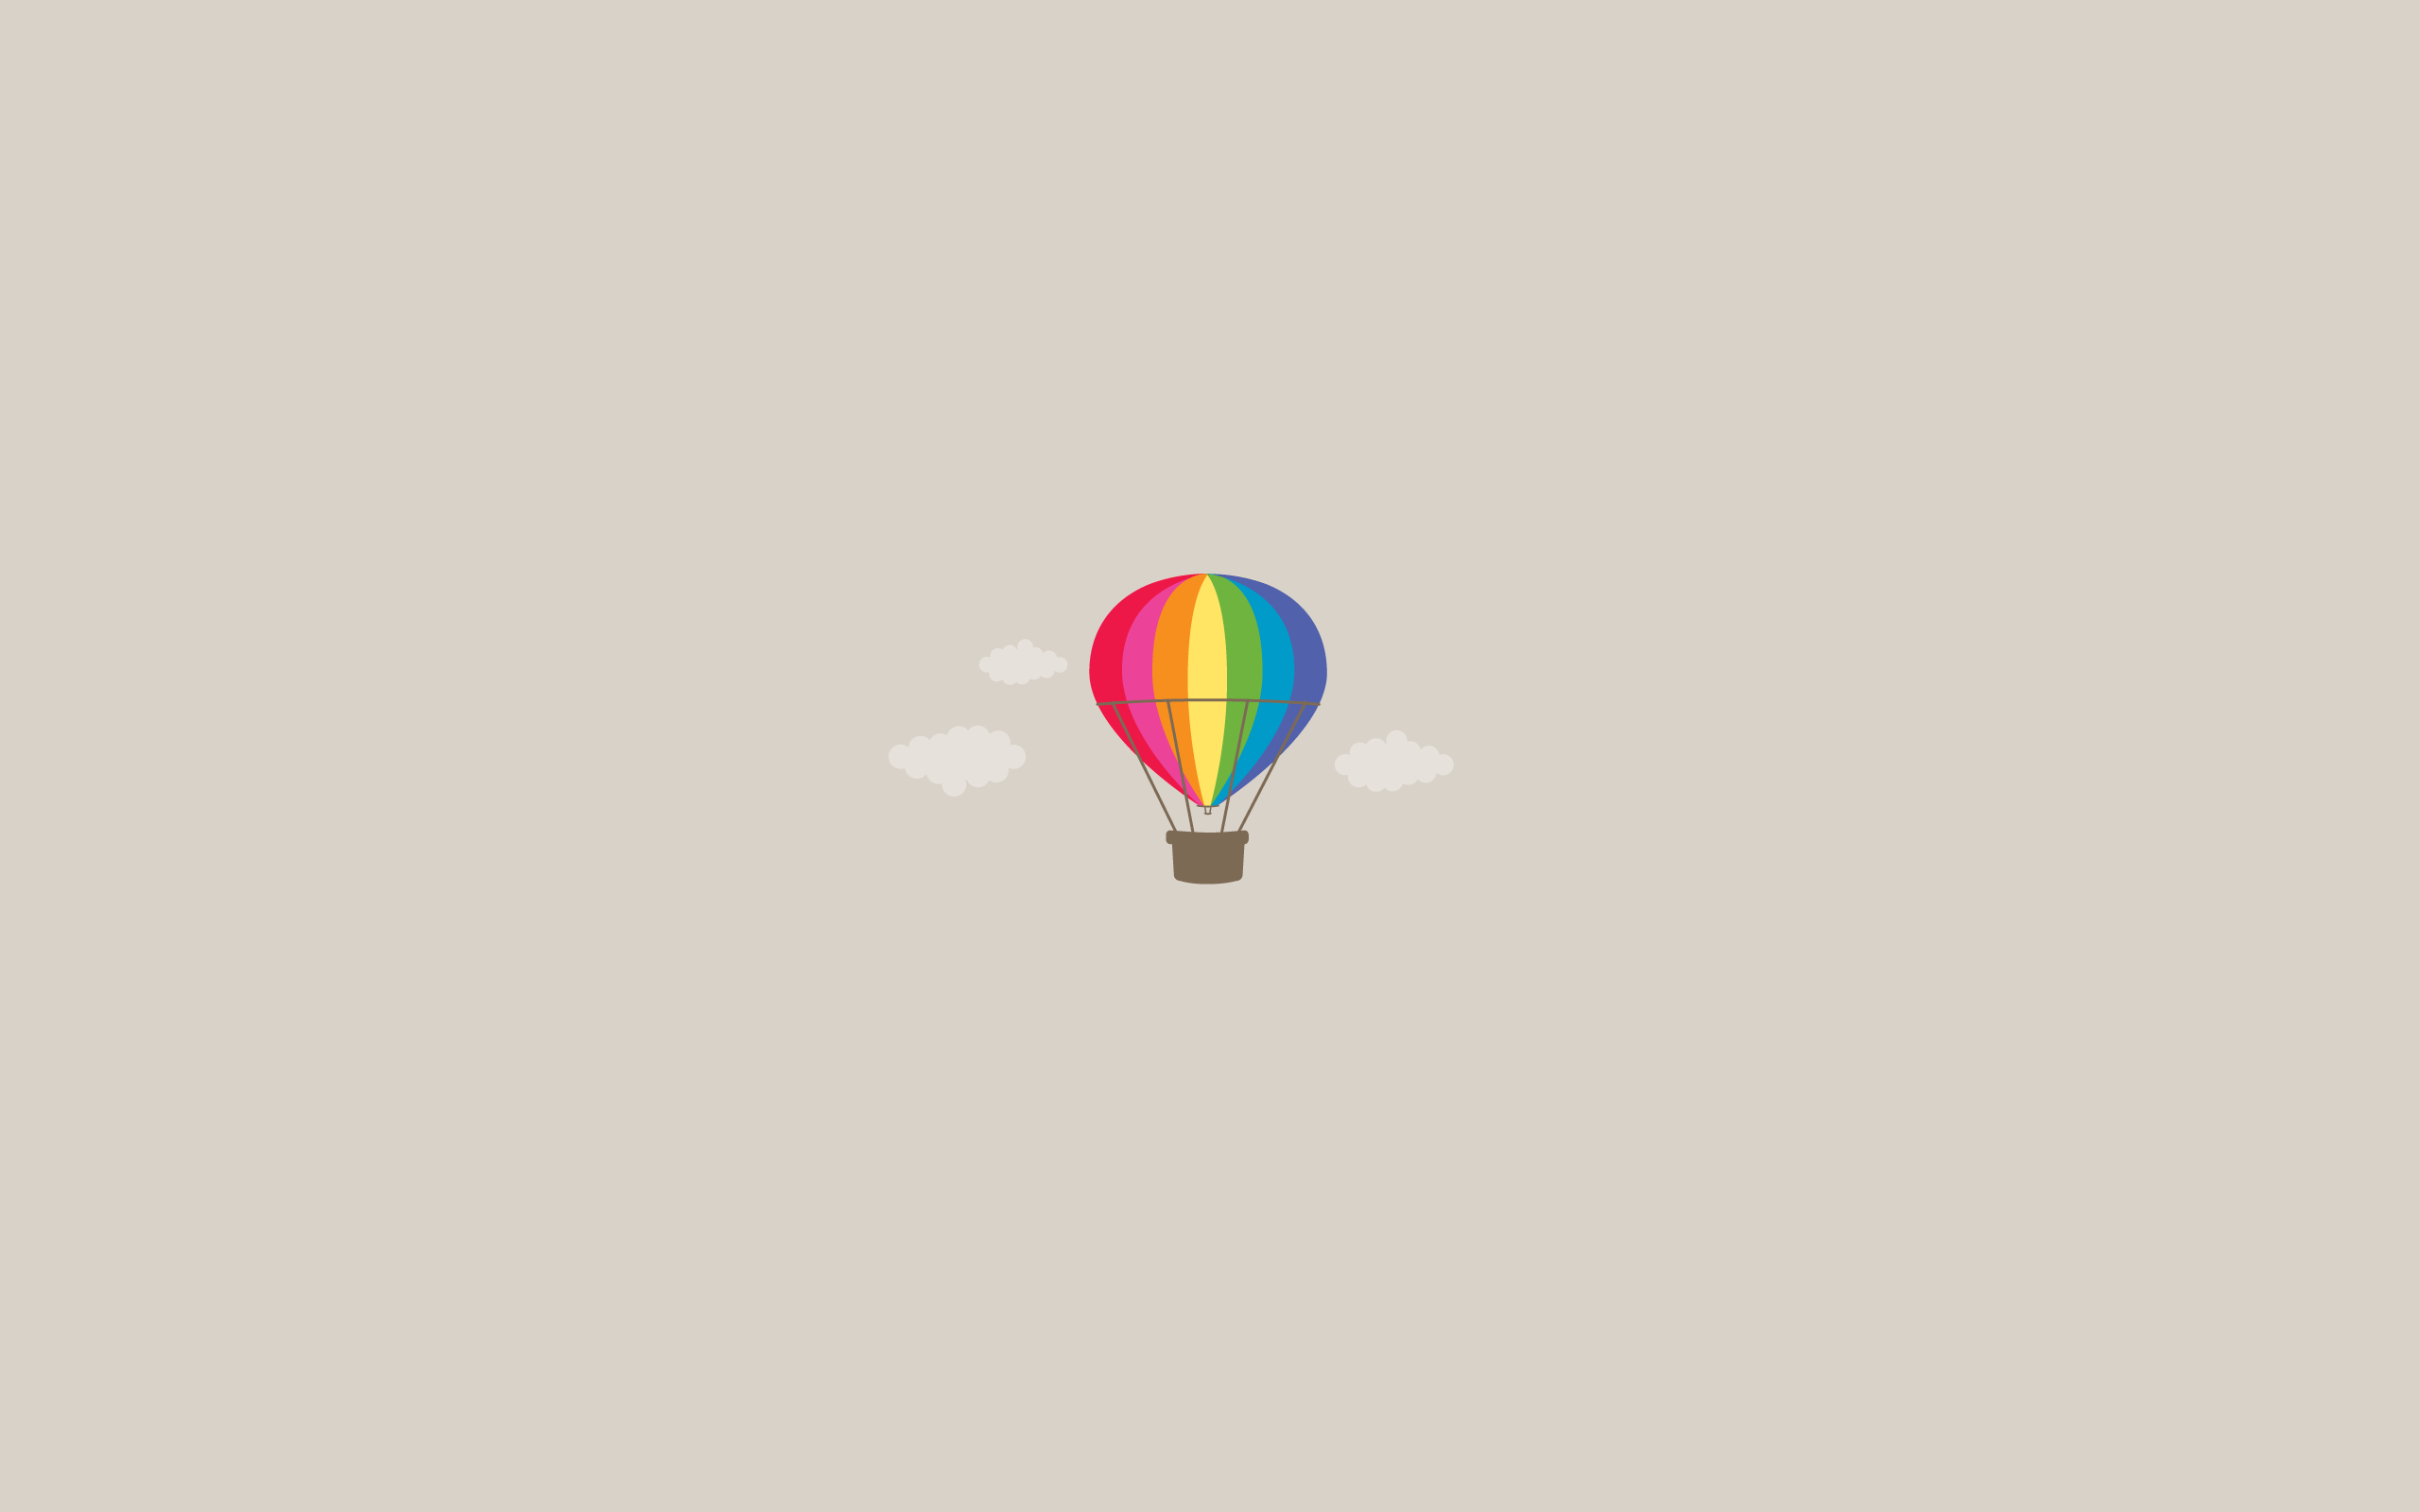 A colorful hot air balloon in the sky - 2560x1600